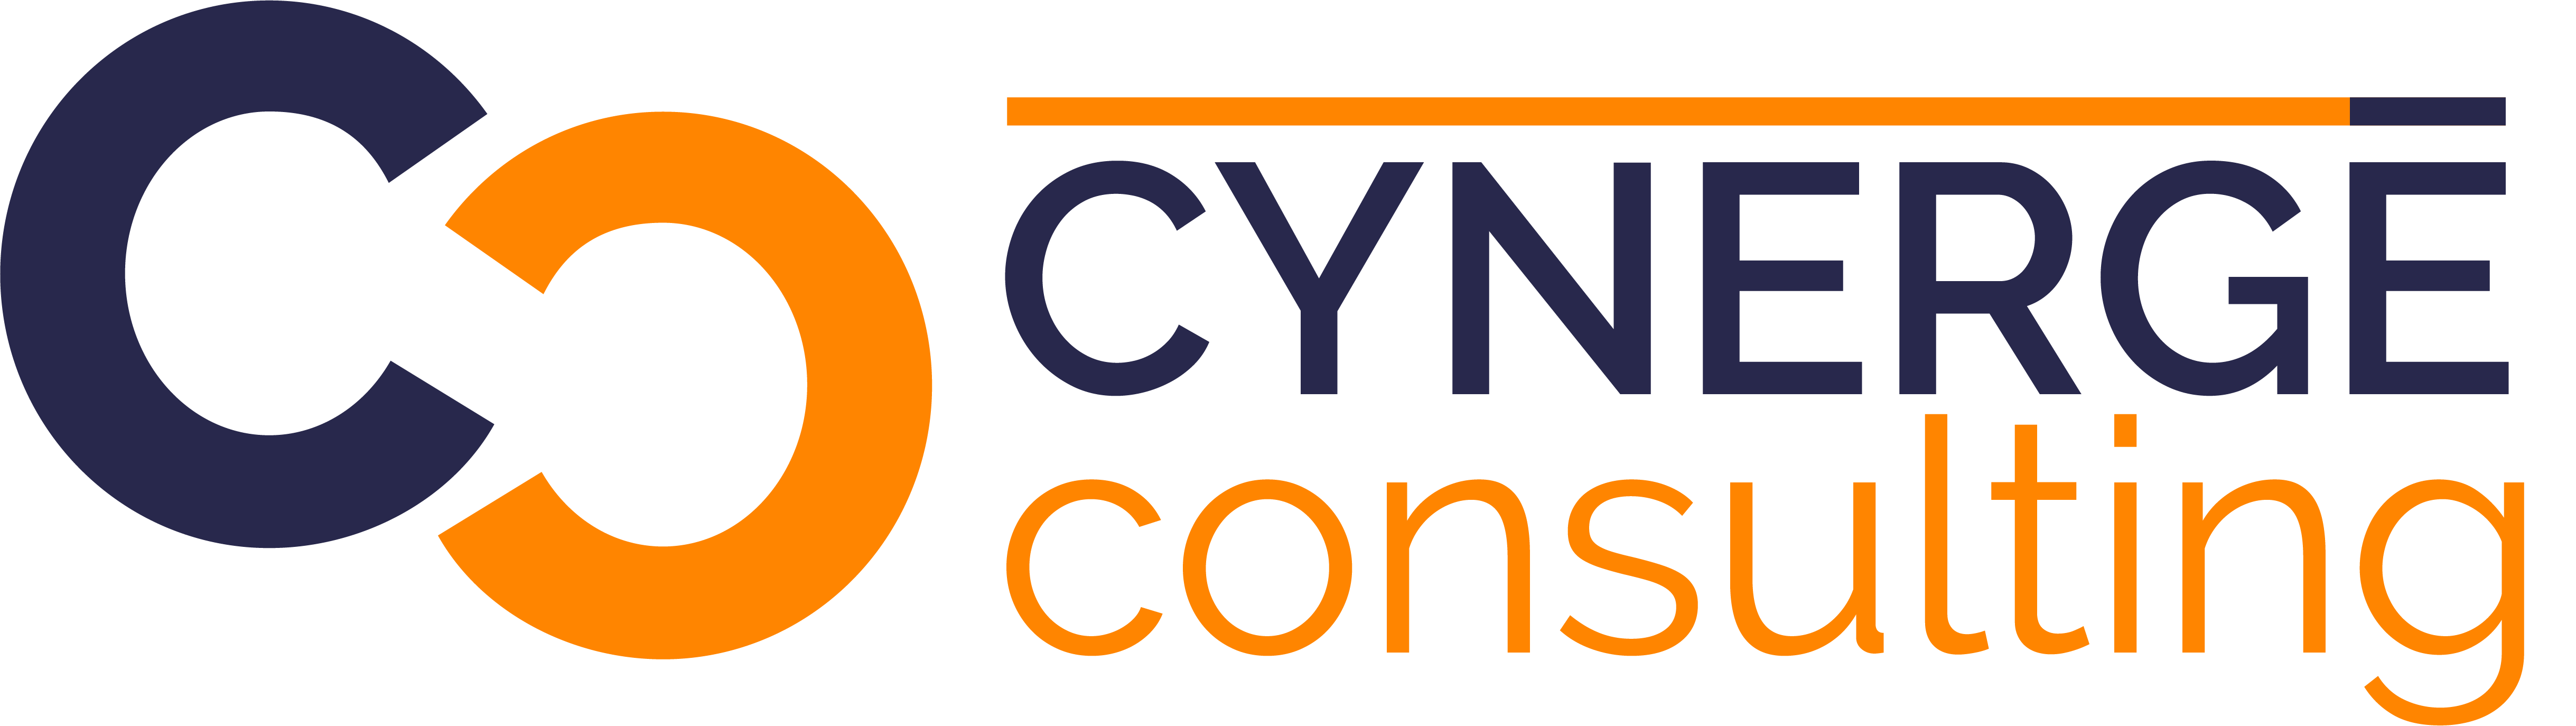 Cynerge Consulting Inc